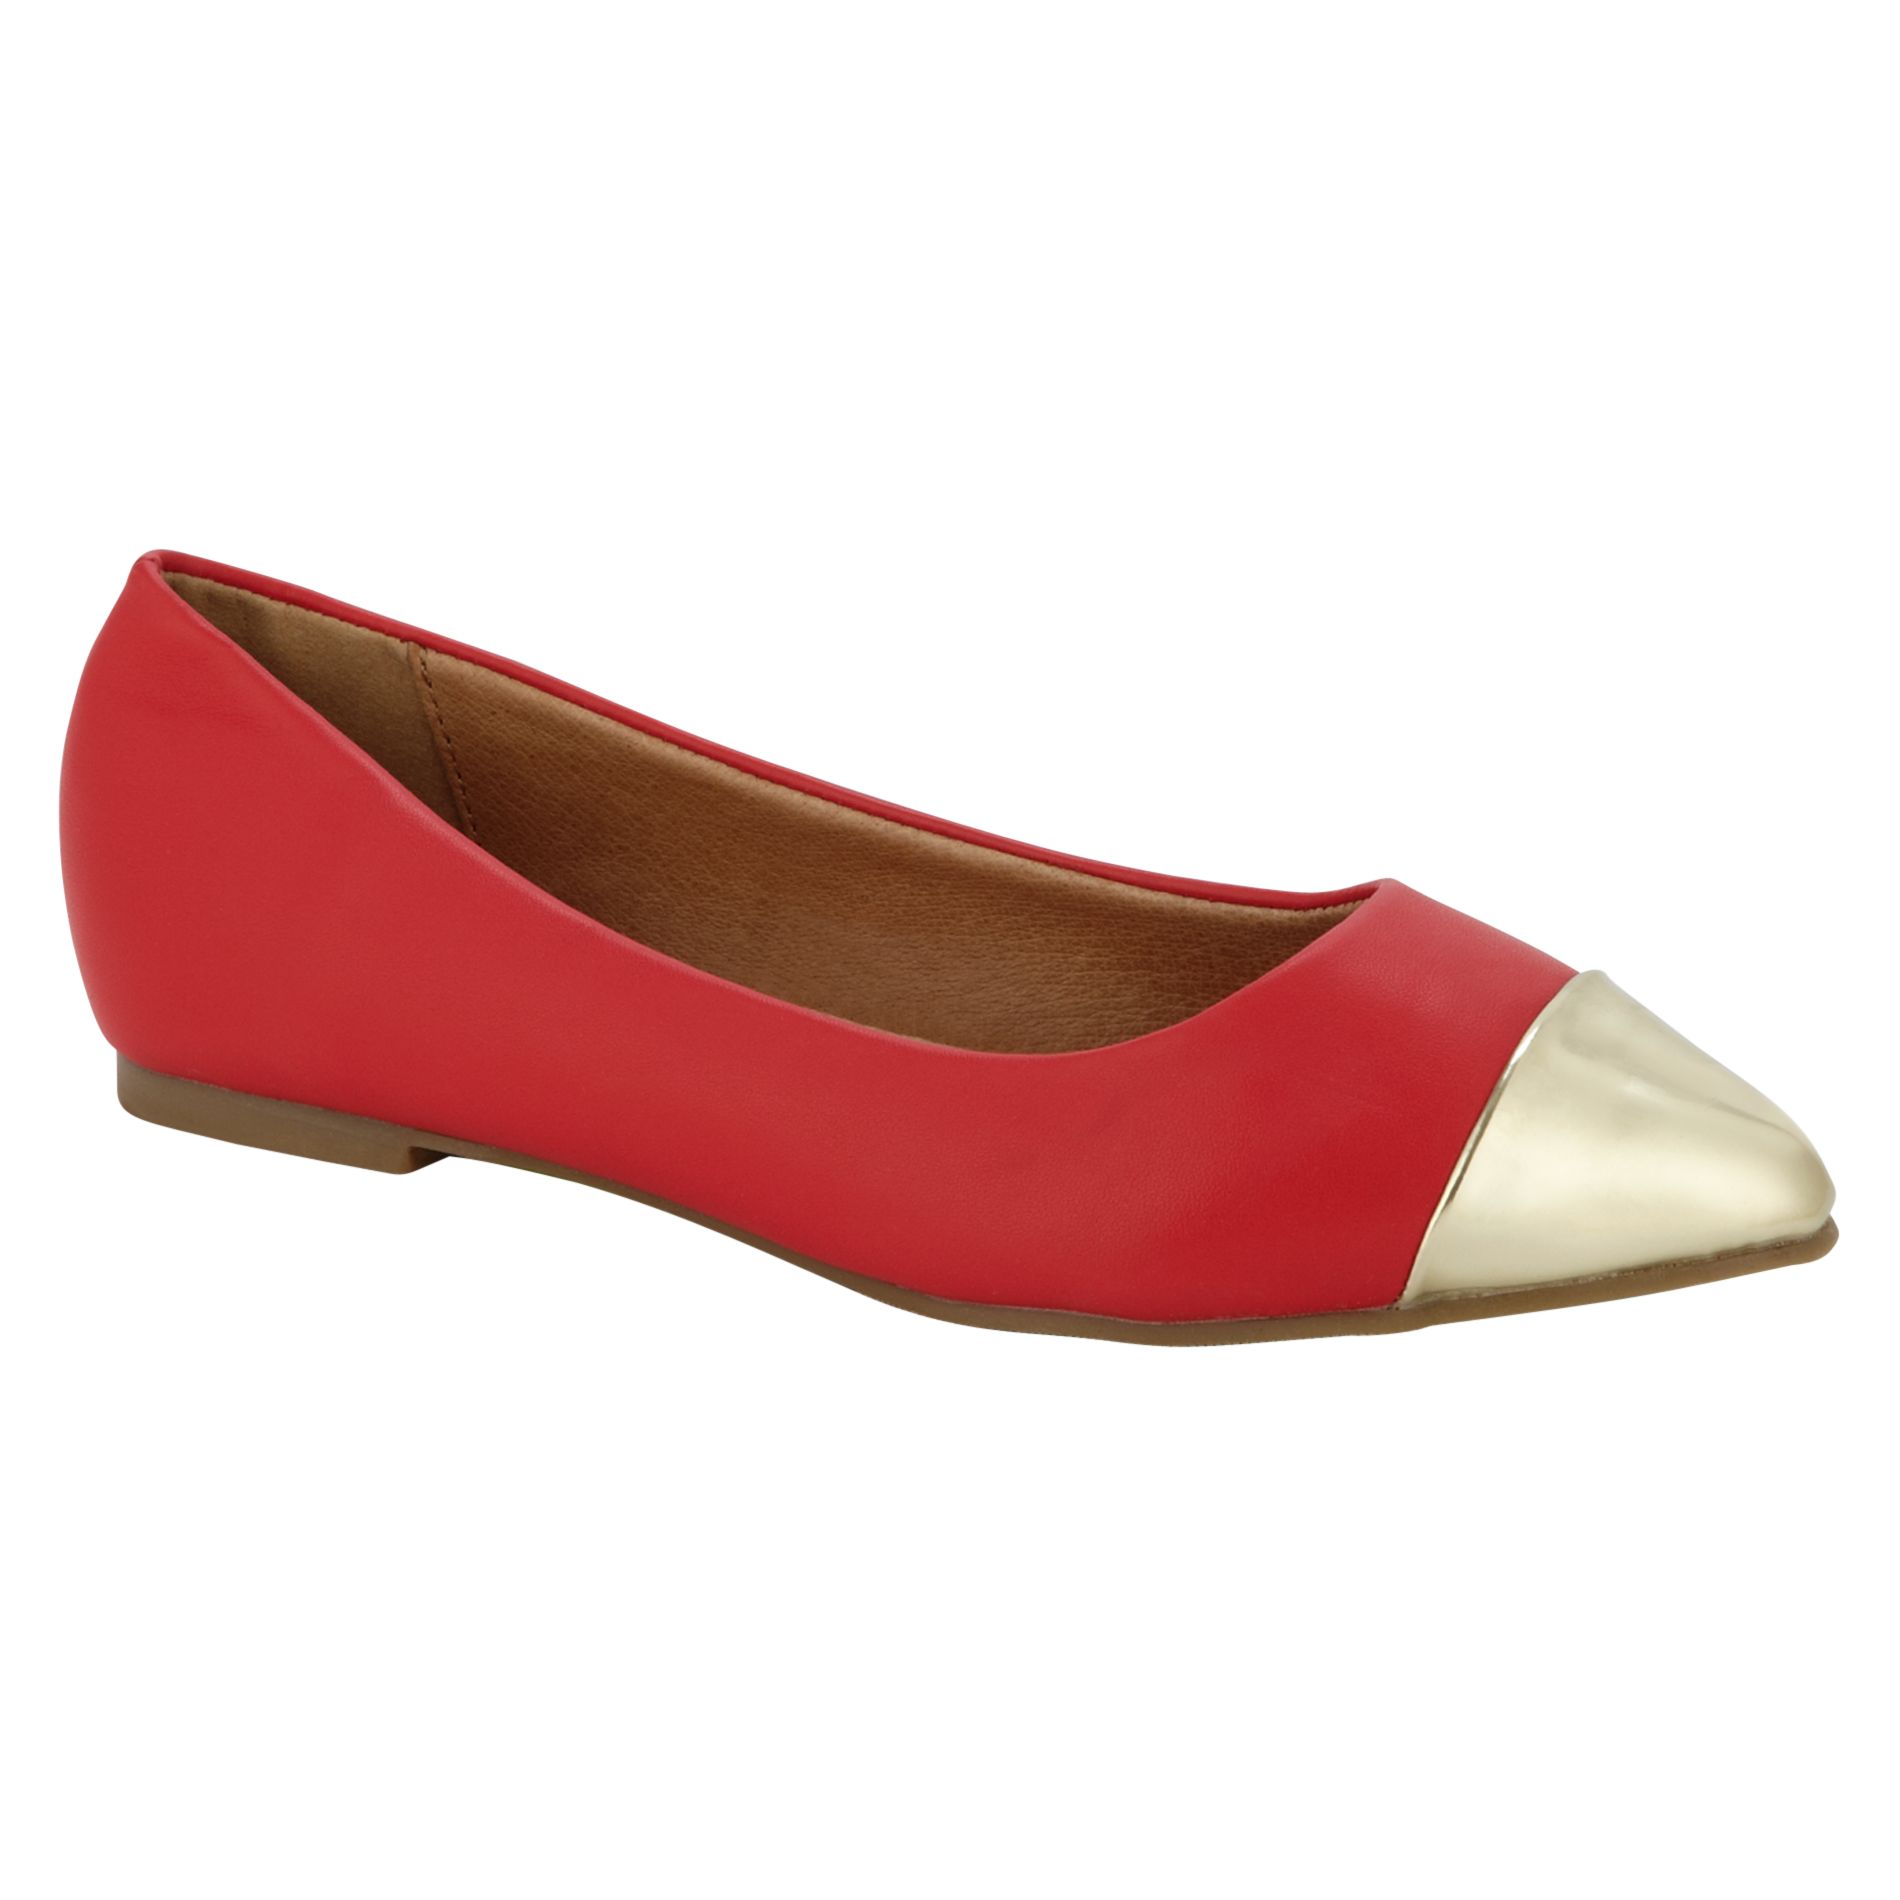 Restricted Women's Casual Flat Gimlet - Red